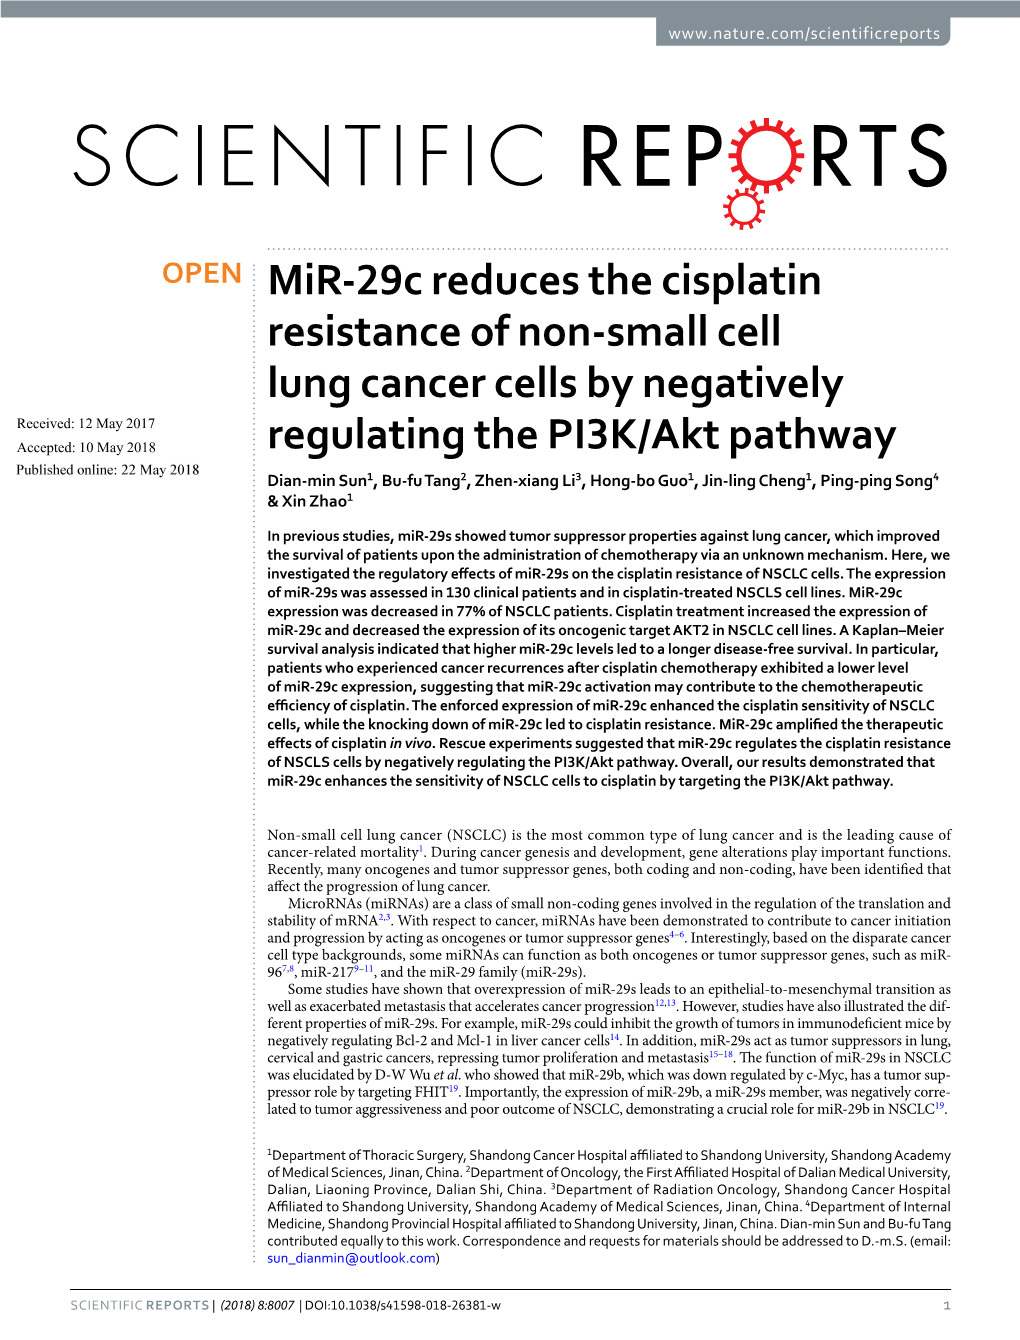 Mir-29C Reduces the Cisplatin Resistance of Non-Small Cell Lung